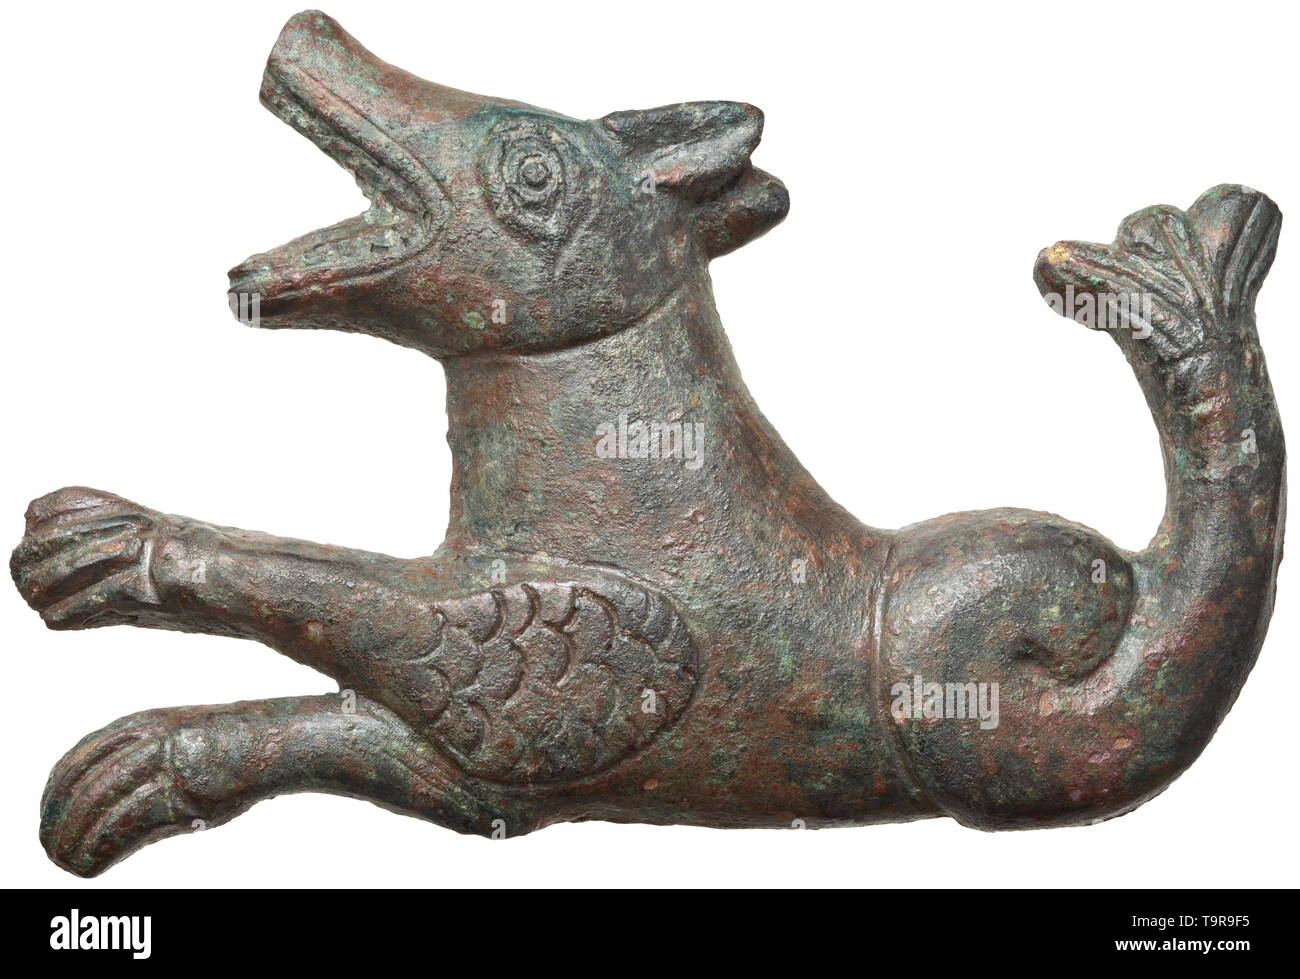 A Roman mount in the form of a mythical water creature, 2nd - 3rd century Solid, bronze mount in high half relief. A mythical creature half canine, half fish. In the open mouth visible fangs, scaled foreleg. Rare portrayal in provincial style. Green patina, length 11 cm. Probably a chariot mount. Provenance: Viennese private collection, acquired in the 1990s from an art dealer. historic, historical, Roman Empire, ancient world, ancient times, ancient world, Additional-Rights-Clearance-Info-Not-Available Stock Photo